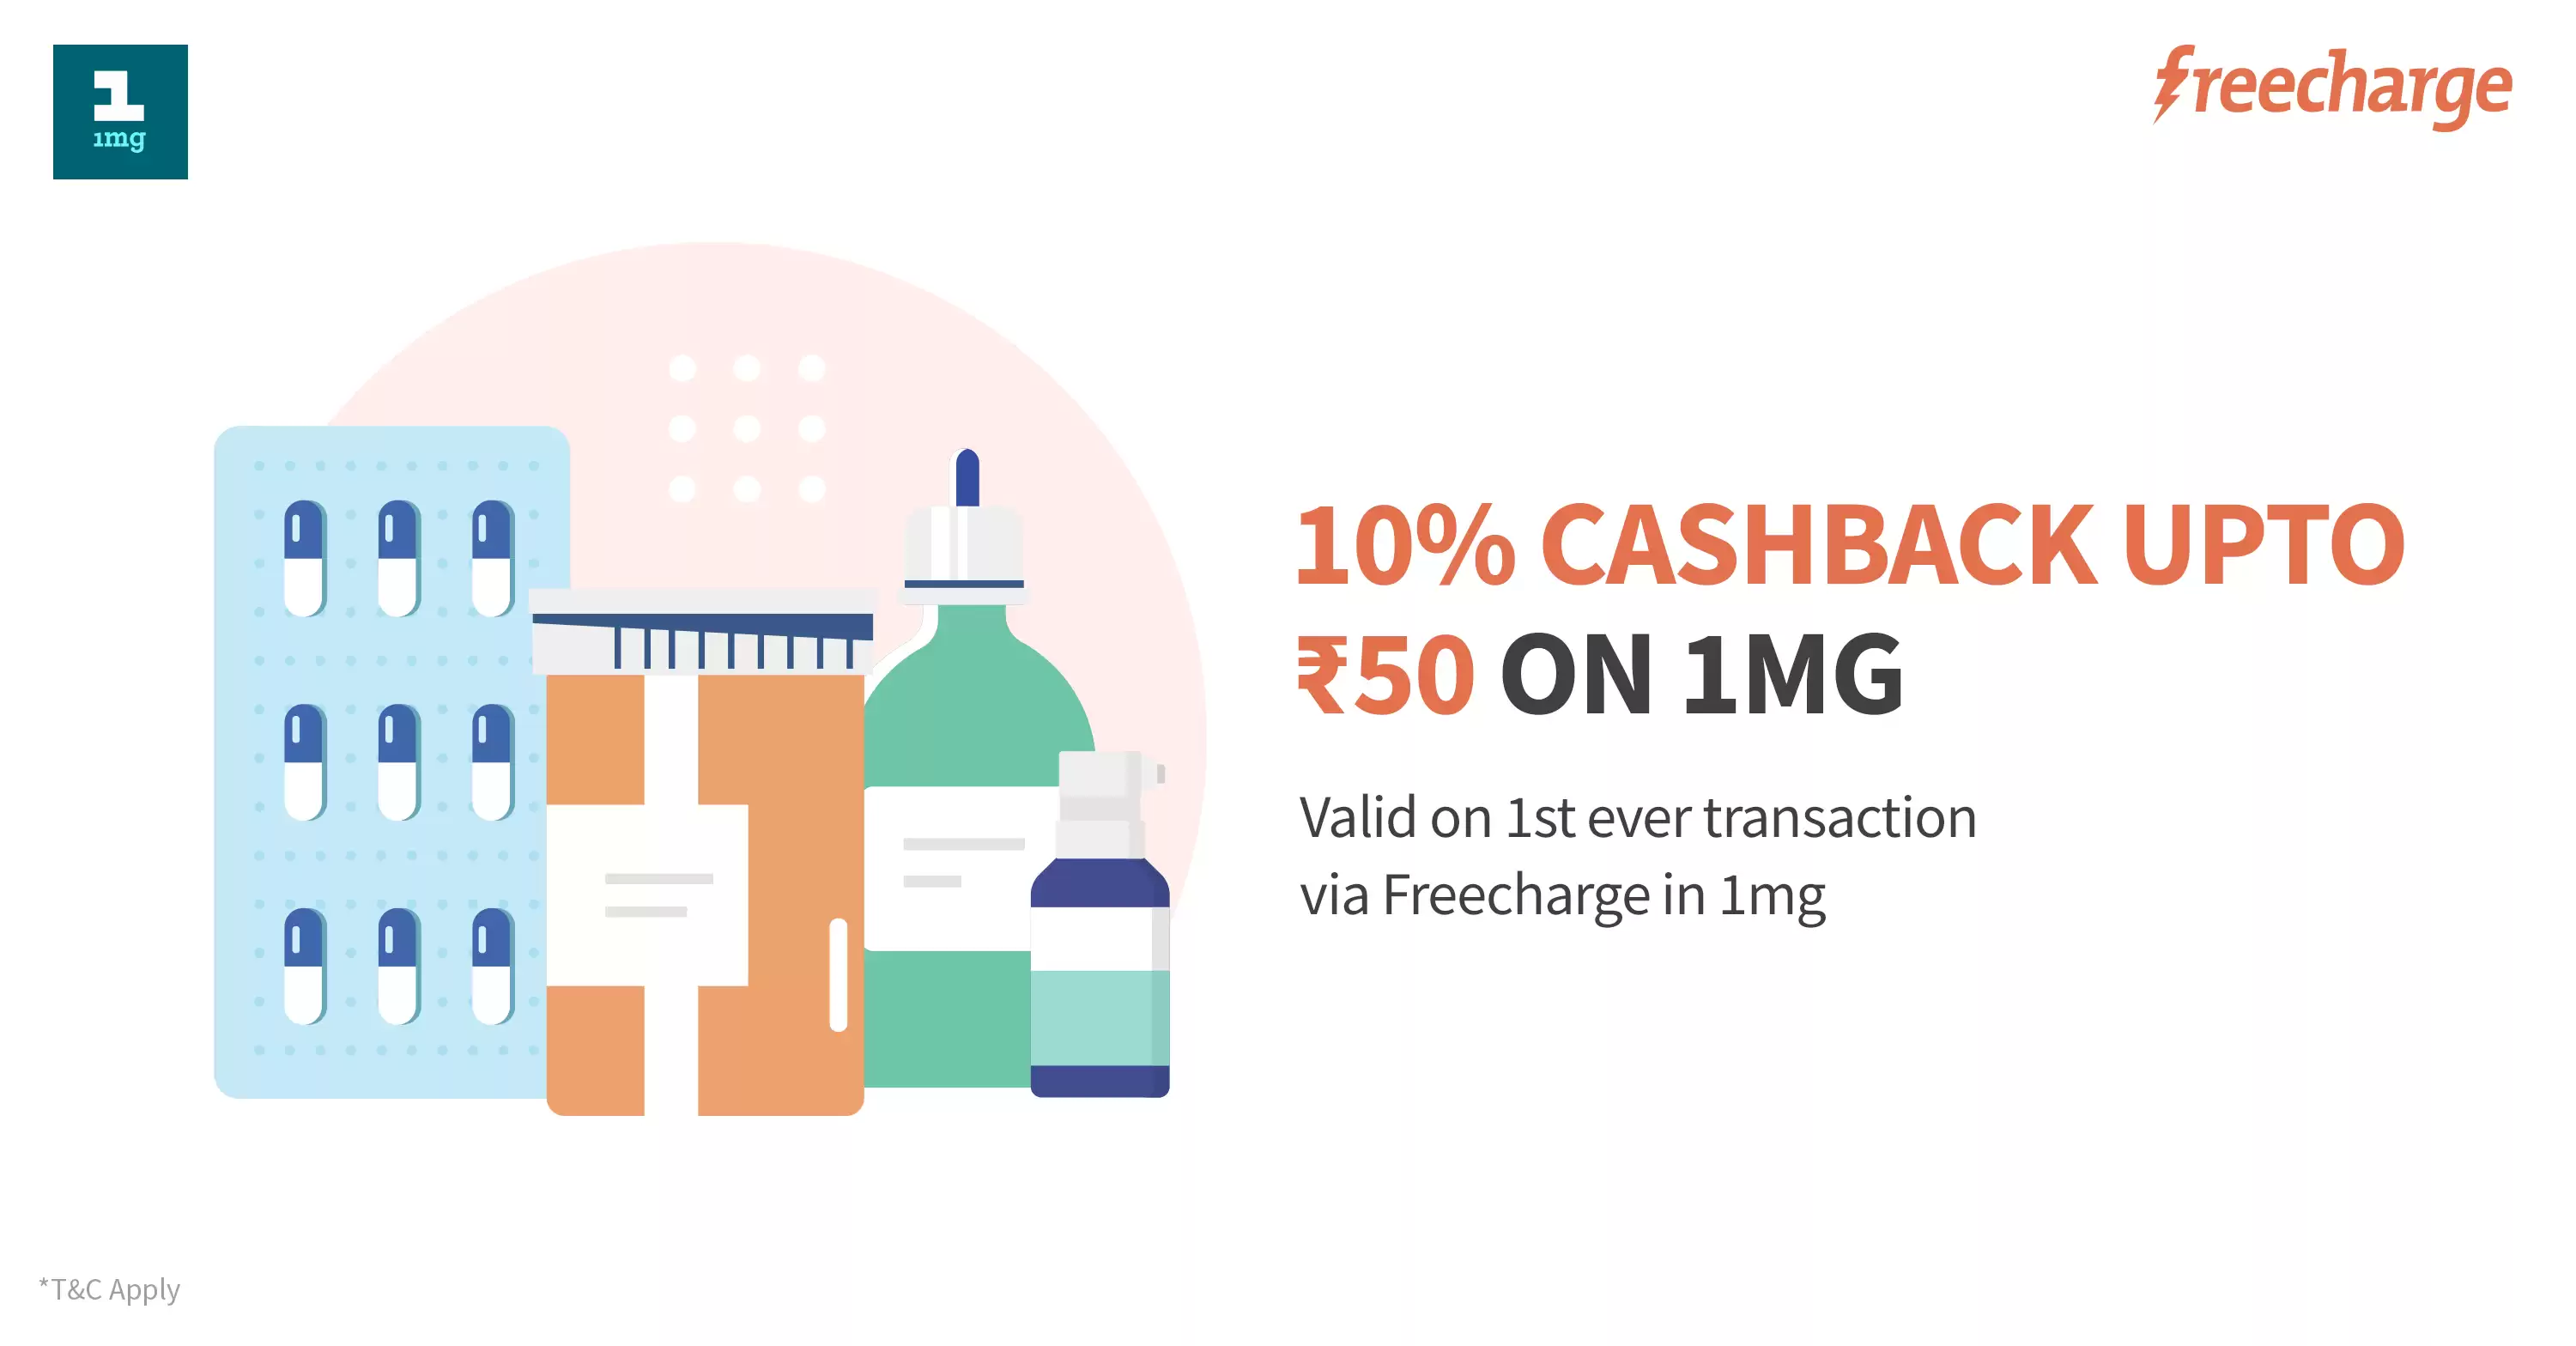 Get 10% Cashback Upto Rs.50 On First Ever Transaction On 1mg Via Freecharge